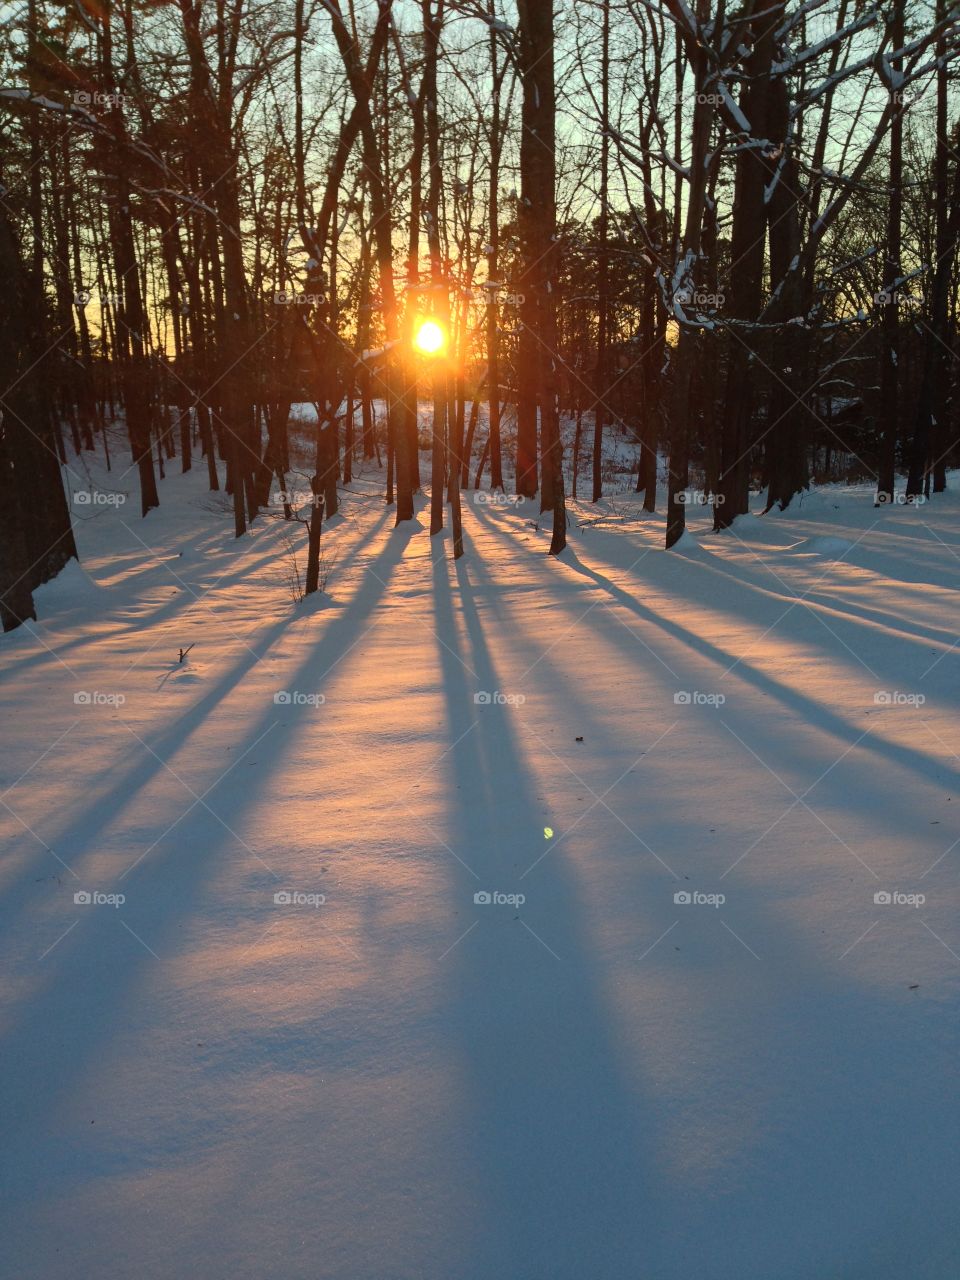 The sun peaking thru just before sunset on the snow